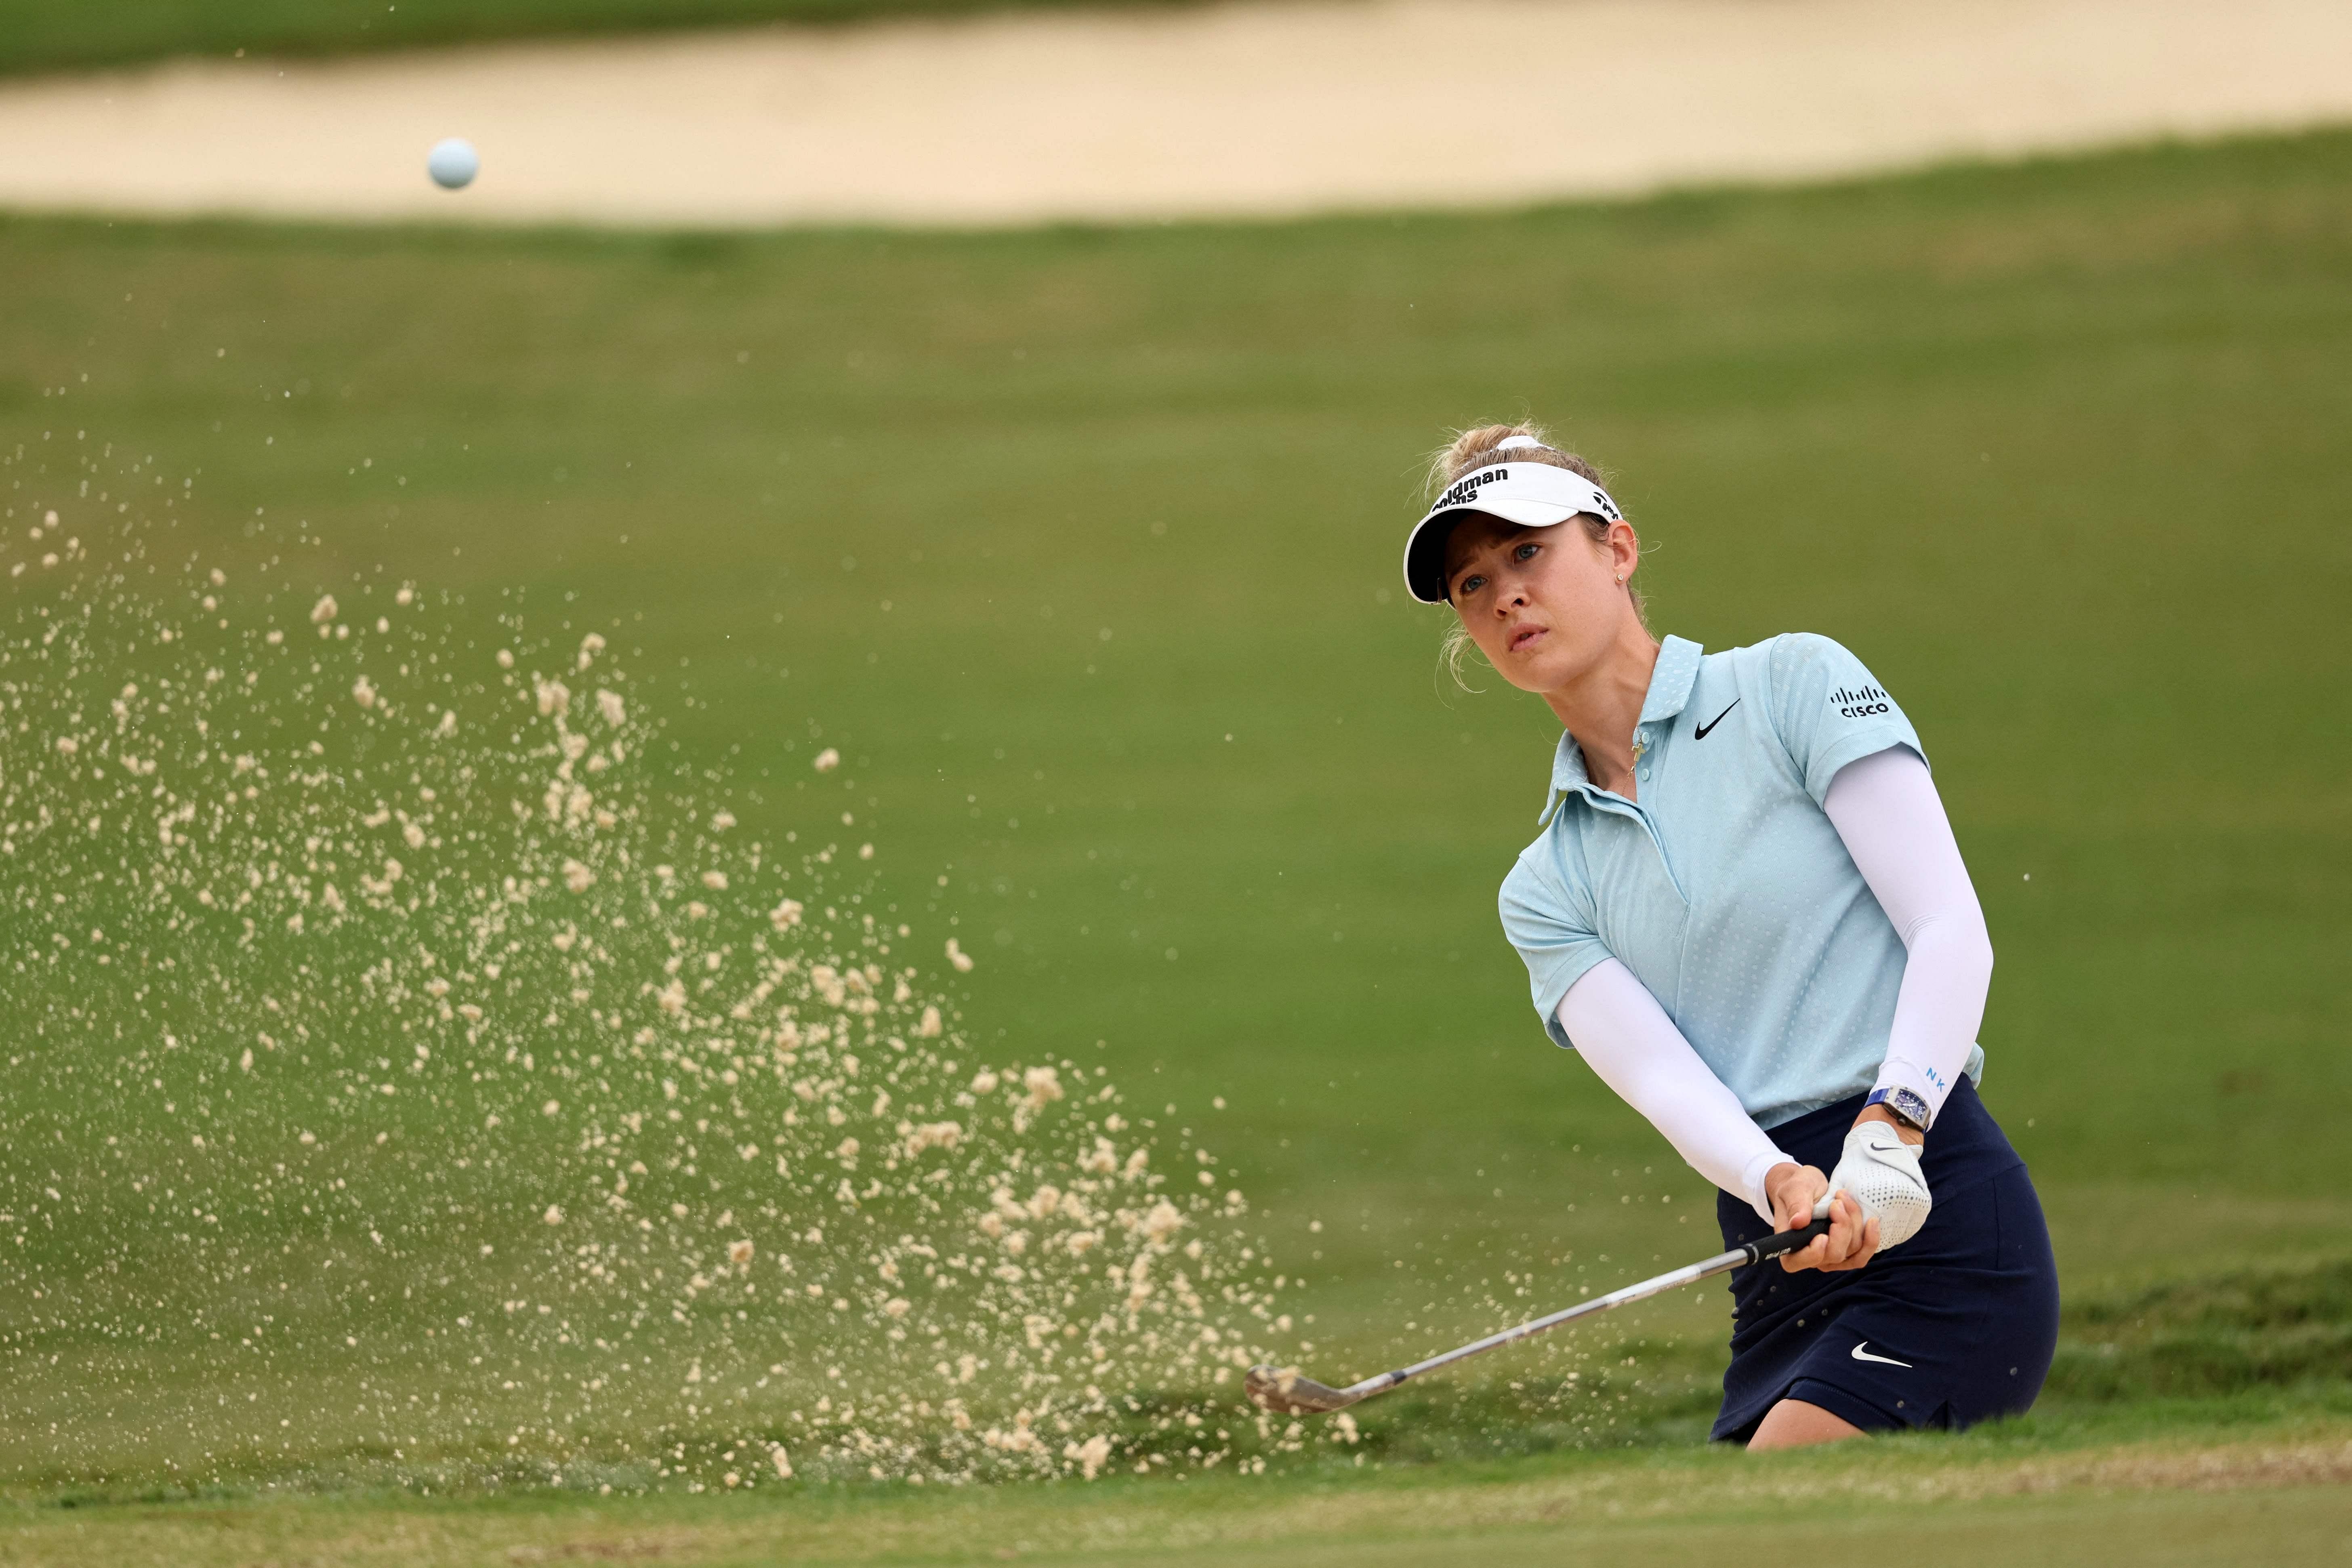 Nelly Korda one off the lead at golf’s Chevron C’ship, Atthaya Thitikul and Im Jin-hee shine